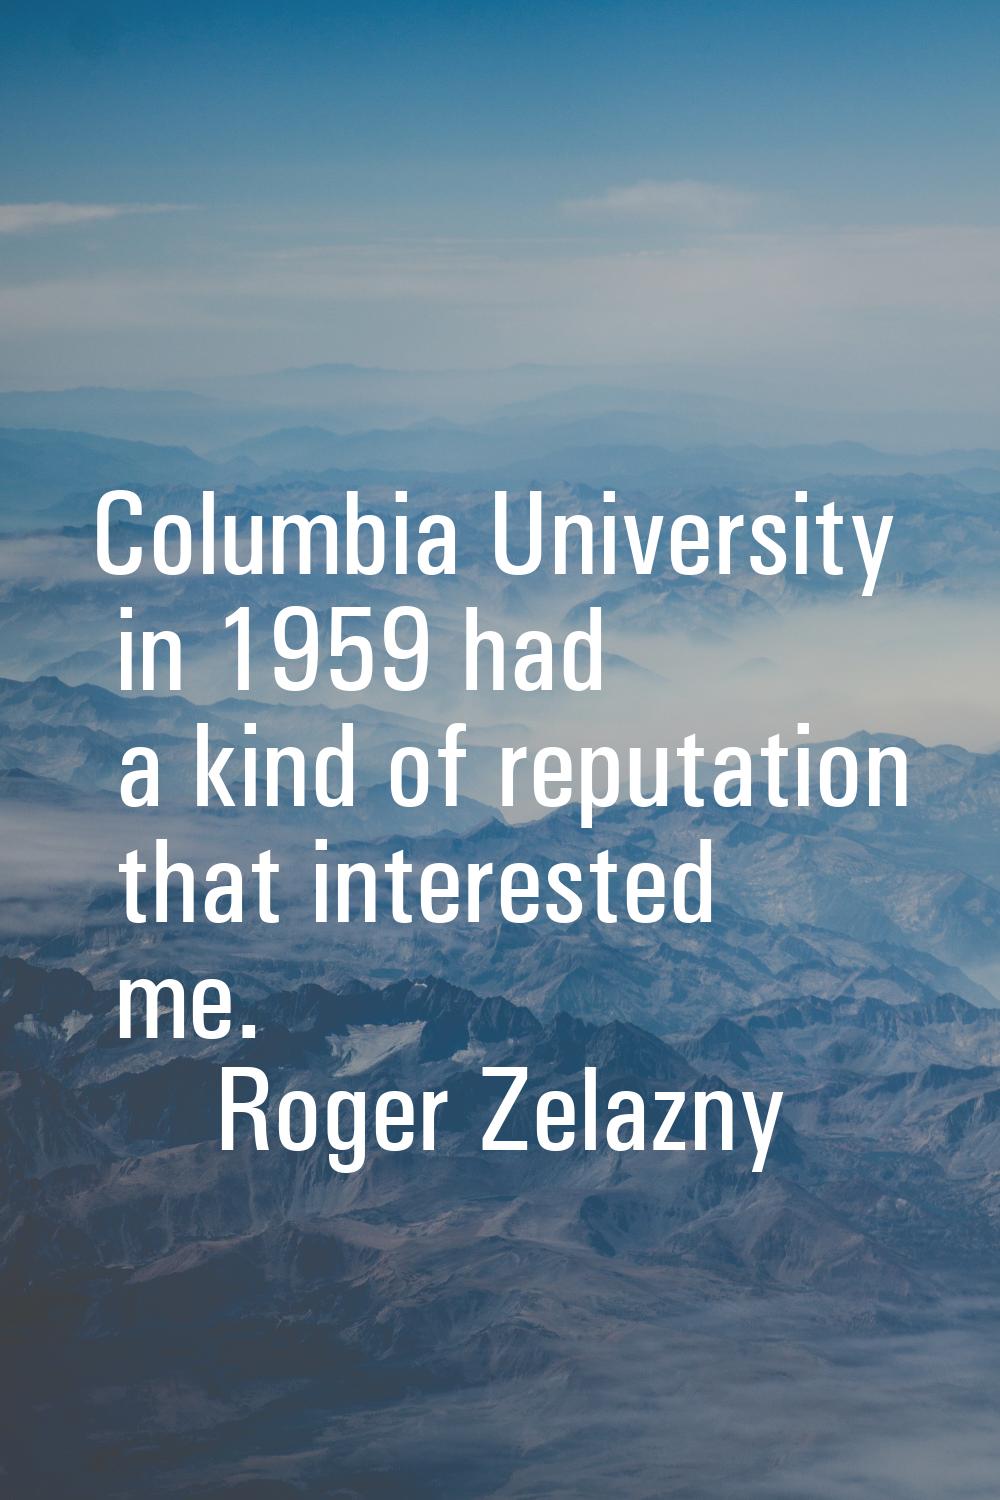 Columbia University in 1959 had a kind of reputation that interested me.